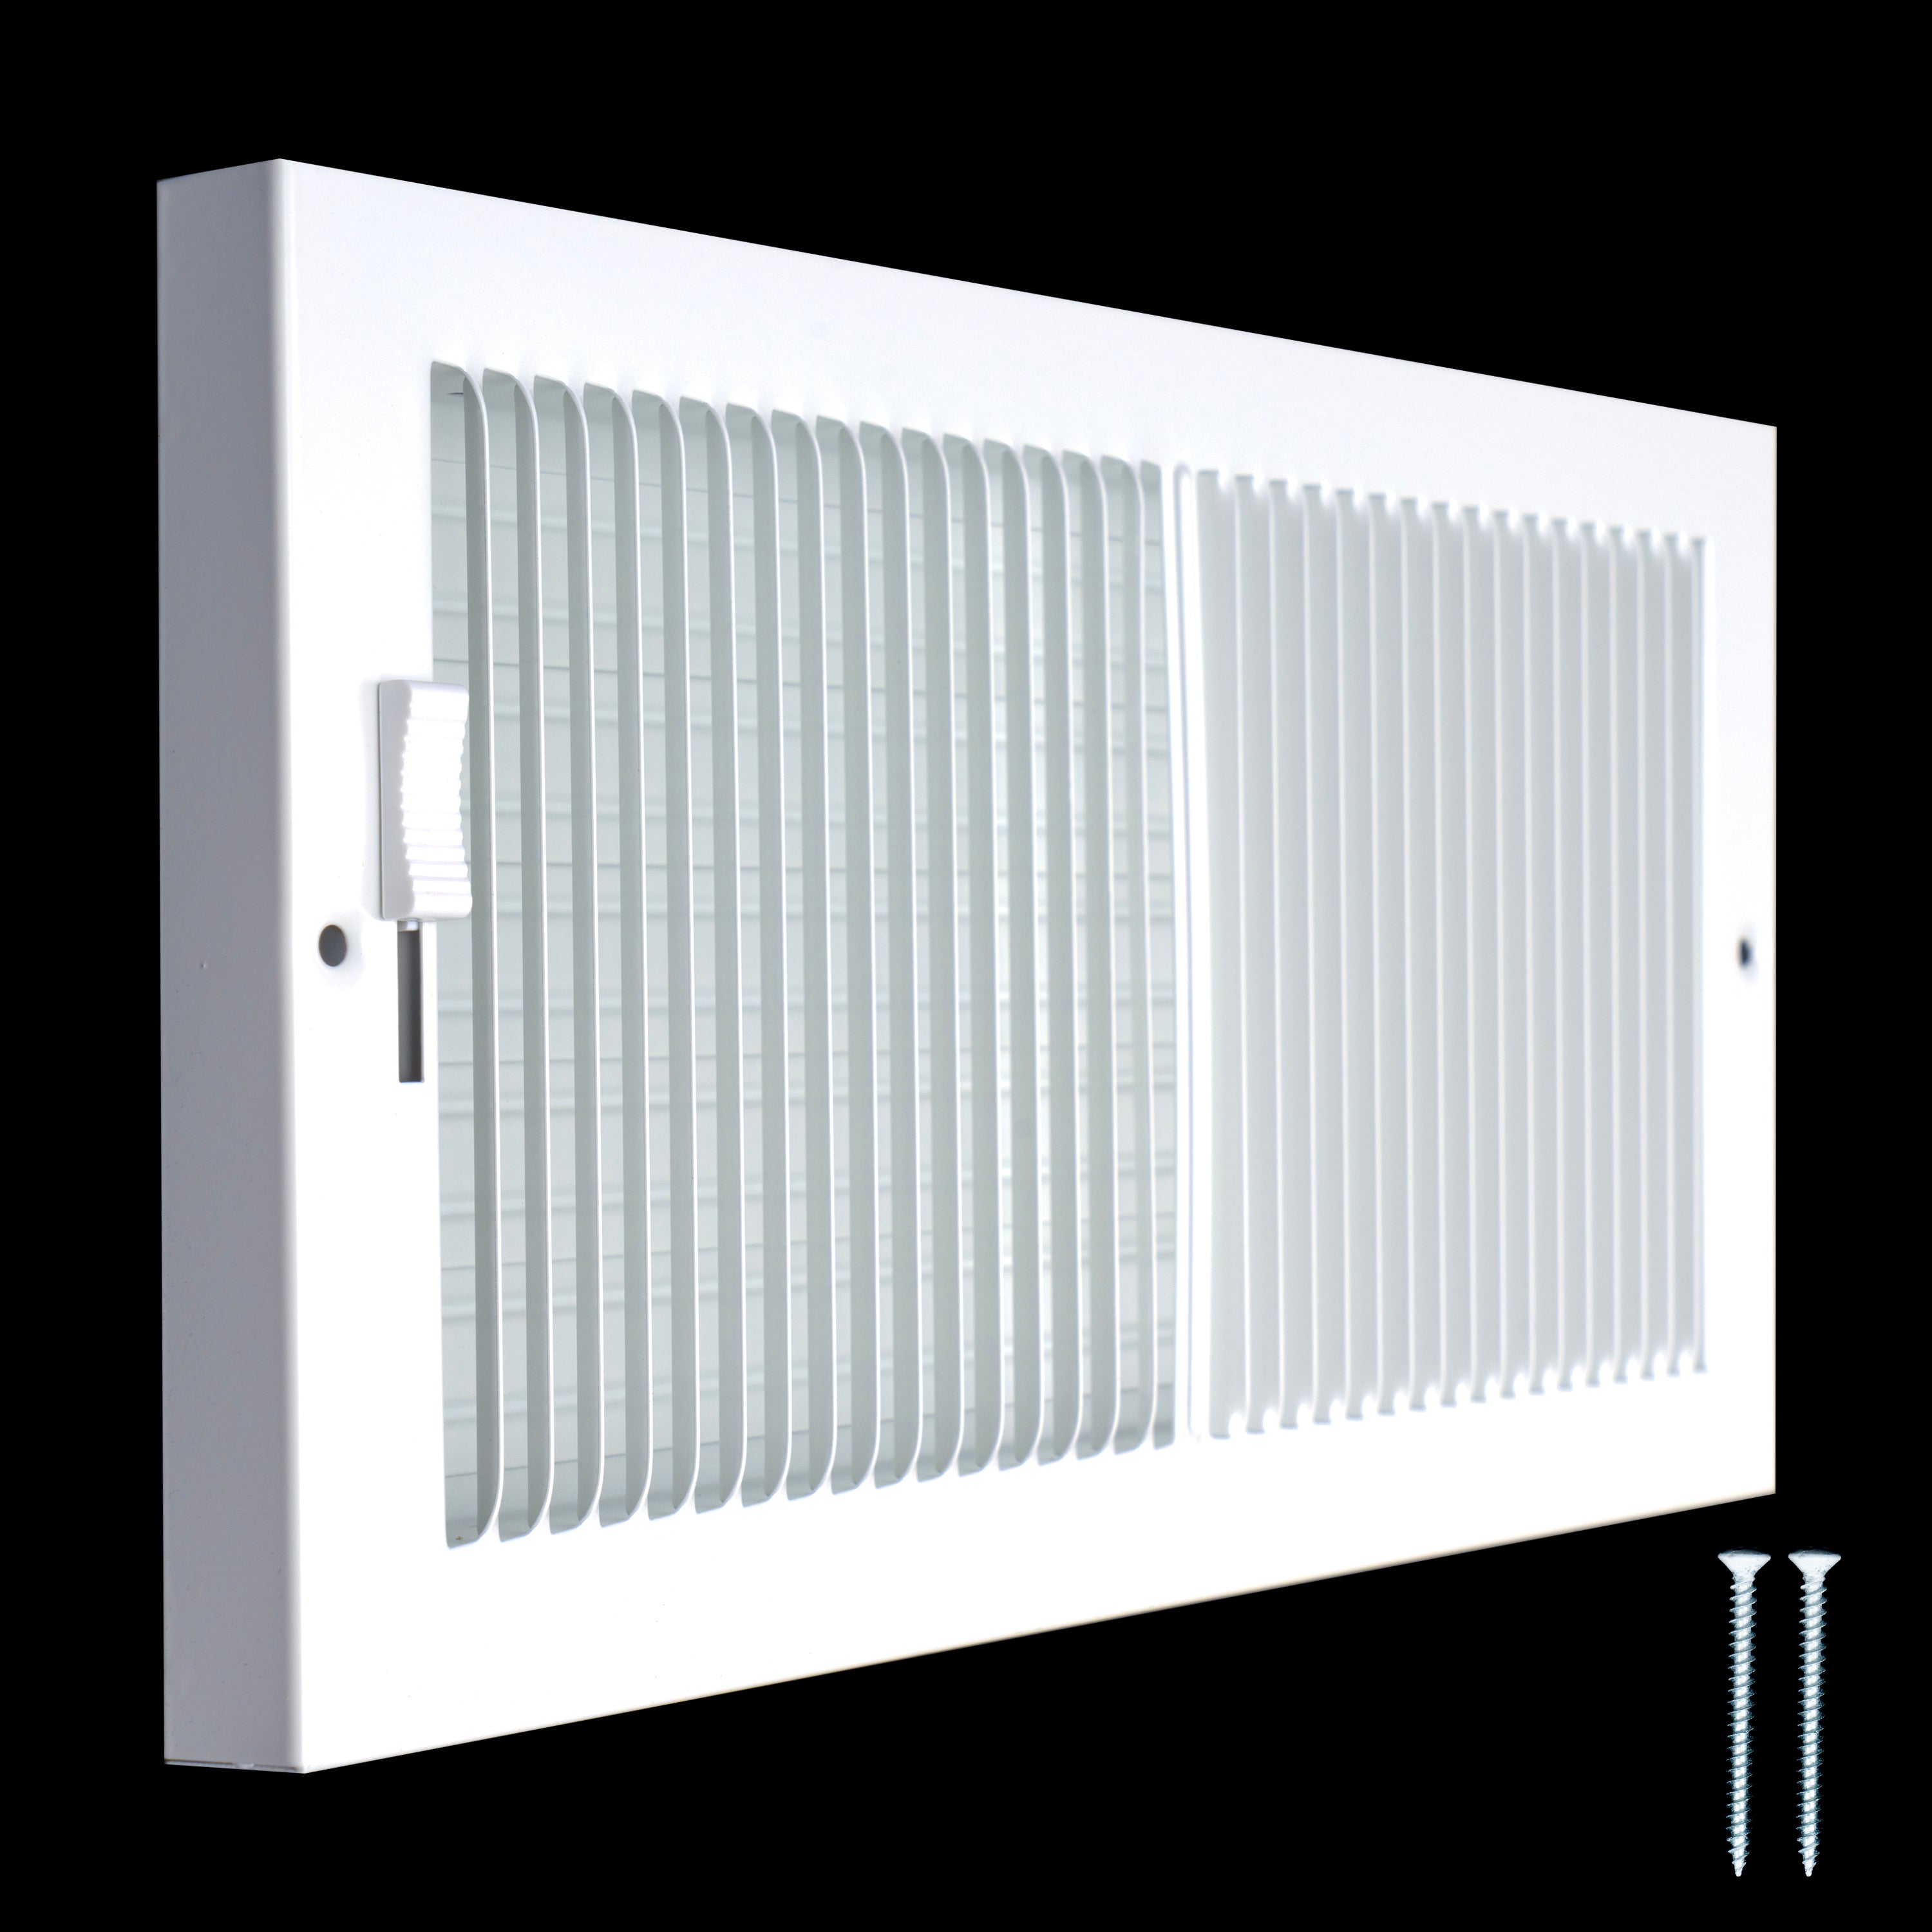 12"W x 6"H [Duct Opening] Steel Baseboard Air Supply Grille with Multi-shutter Damper | White | Outer Dimensions: 13-1/4" x 7-1/4"